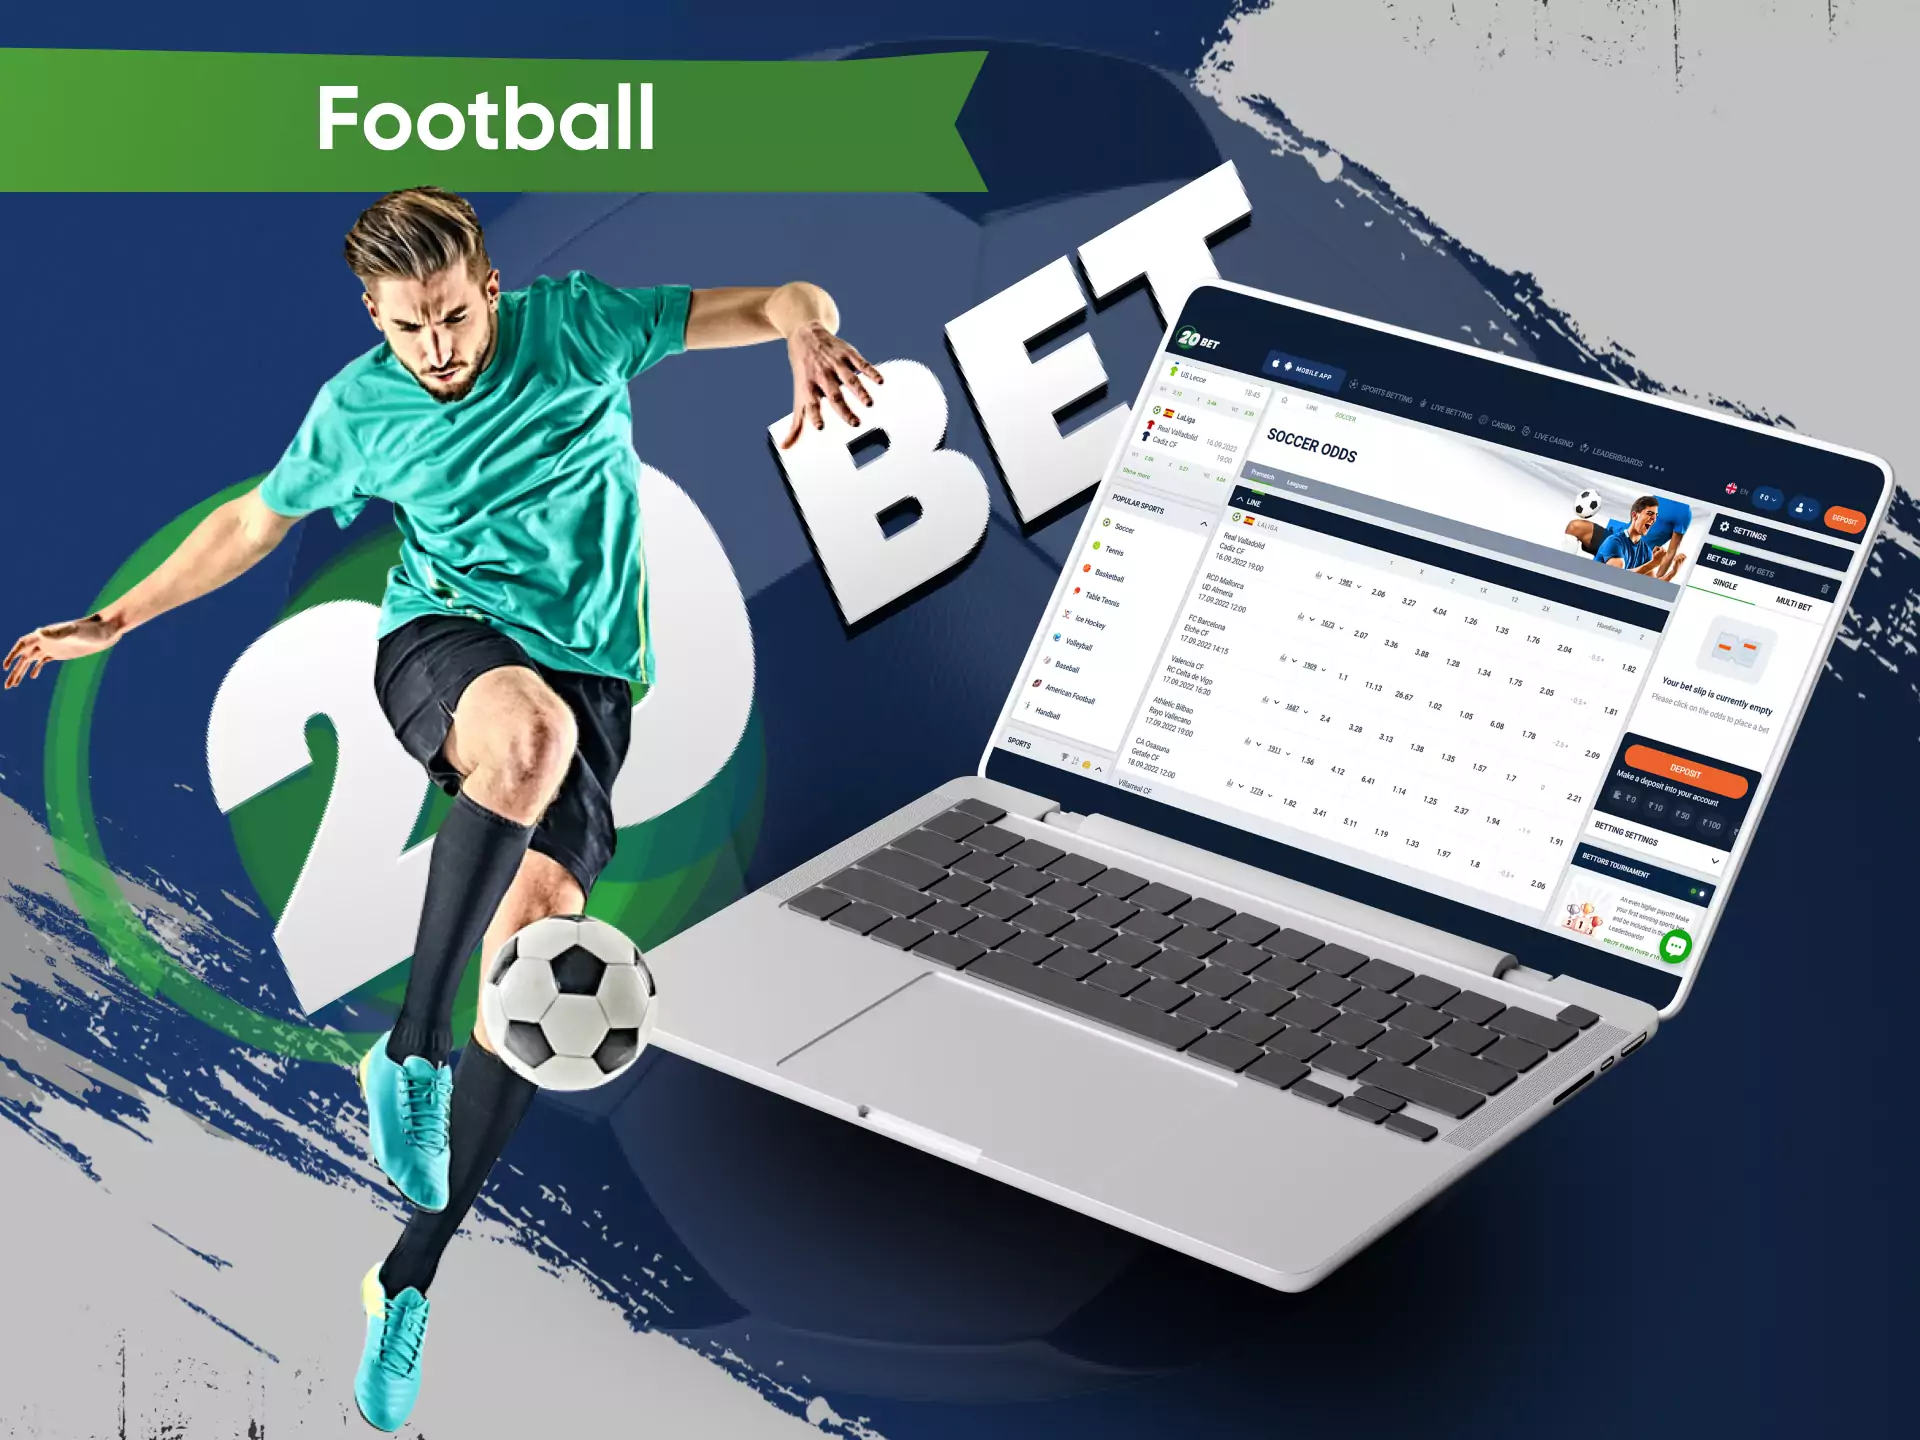 In the 20bet sportsbook, you can bet on football matches online.